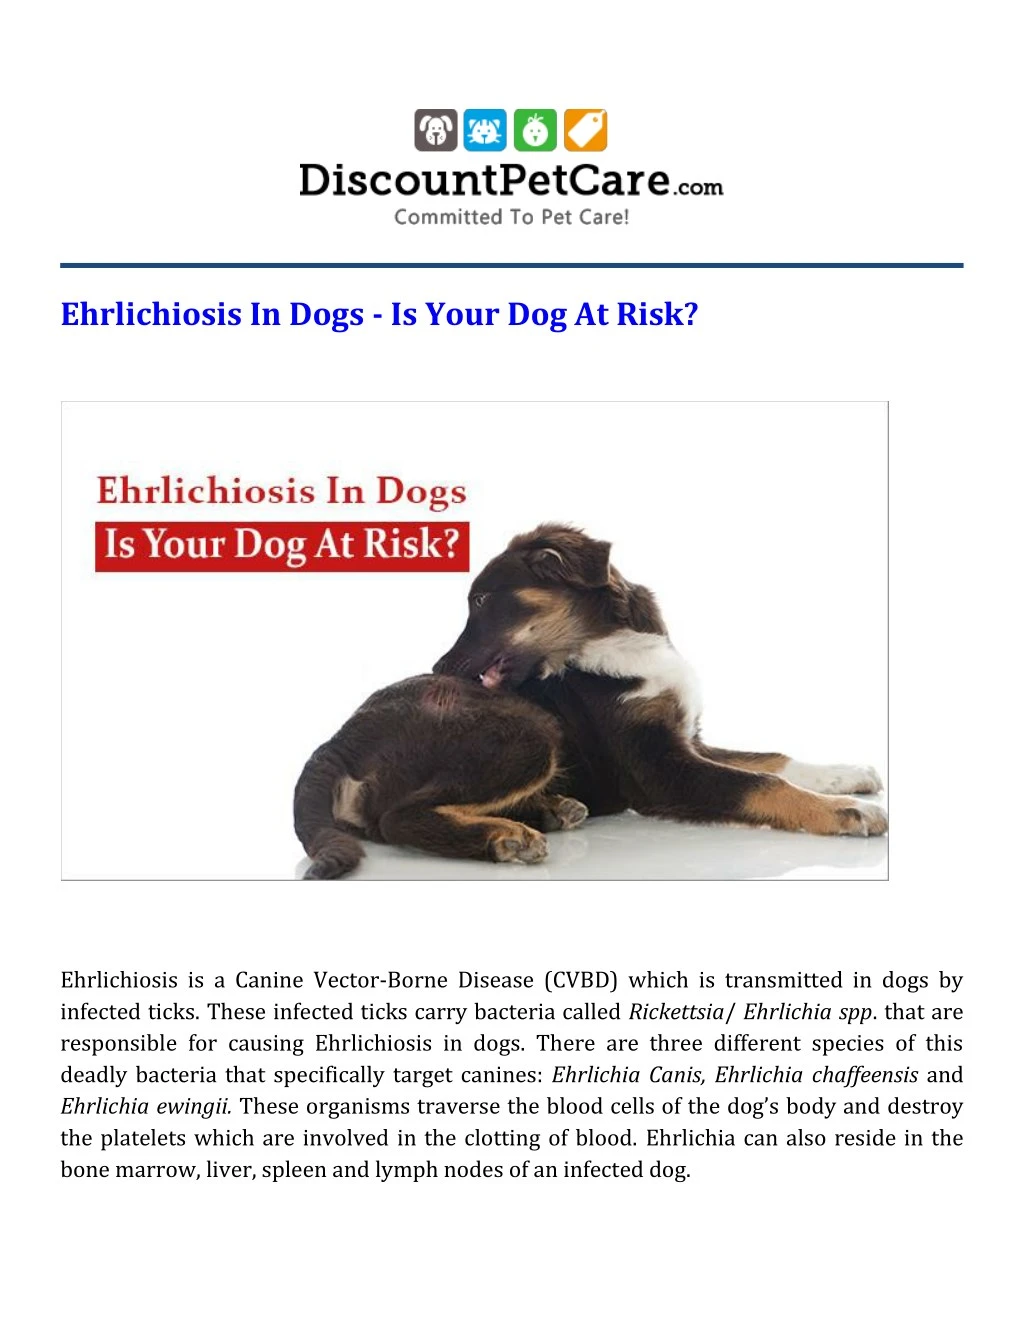 ehrlichiosis in dogs is your dog at risk